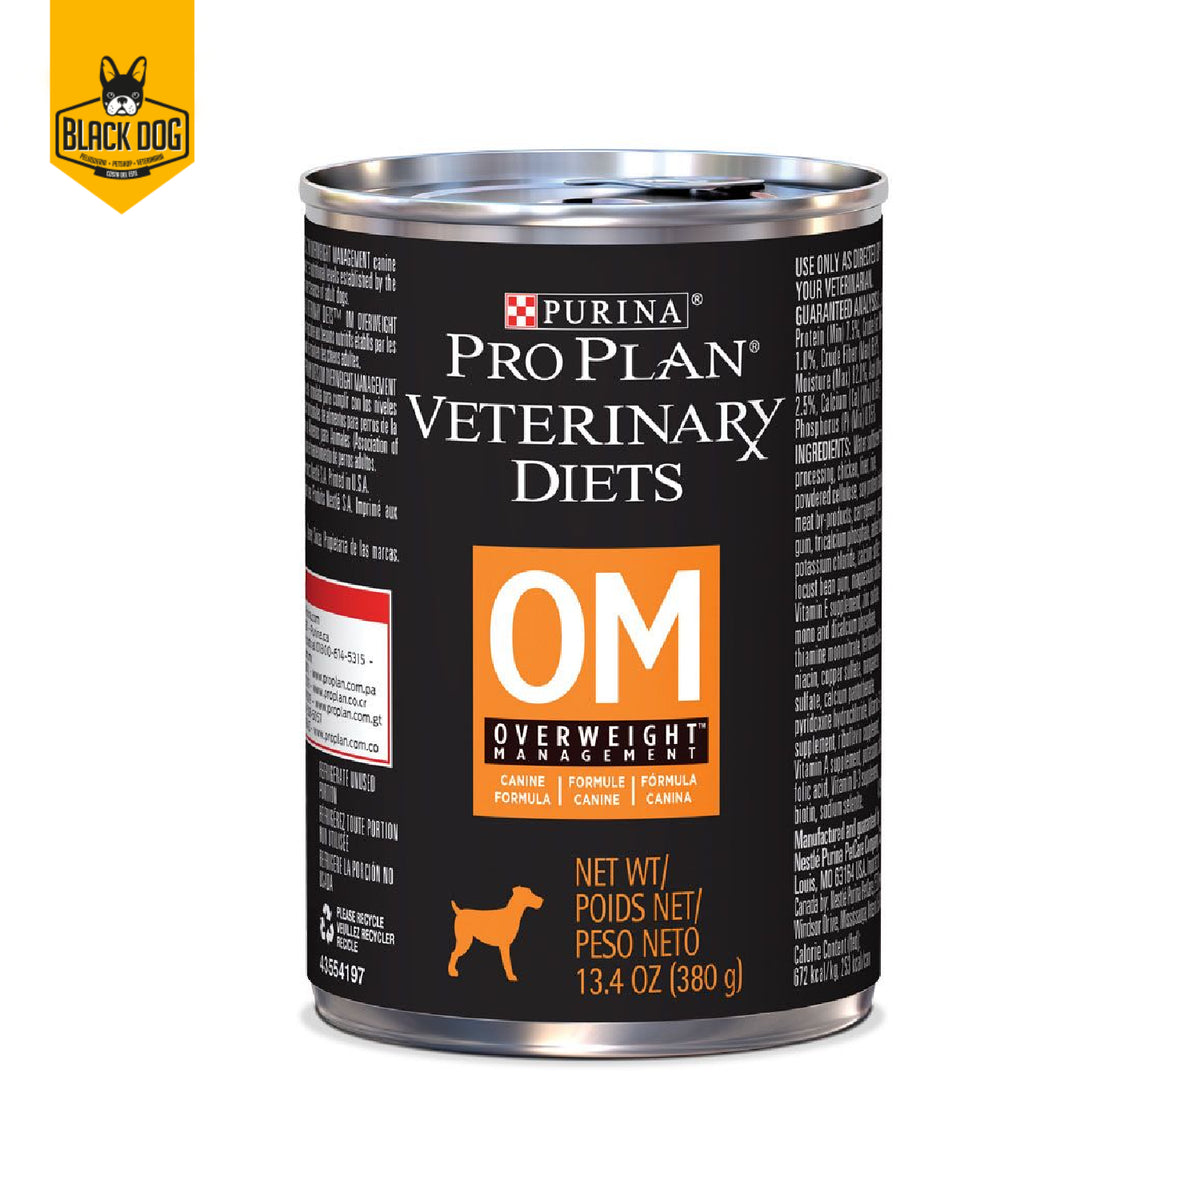 PRO PLAN | Veterinary Diet | OM Overweight Management | Canine | Lata 13.3 Oz